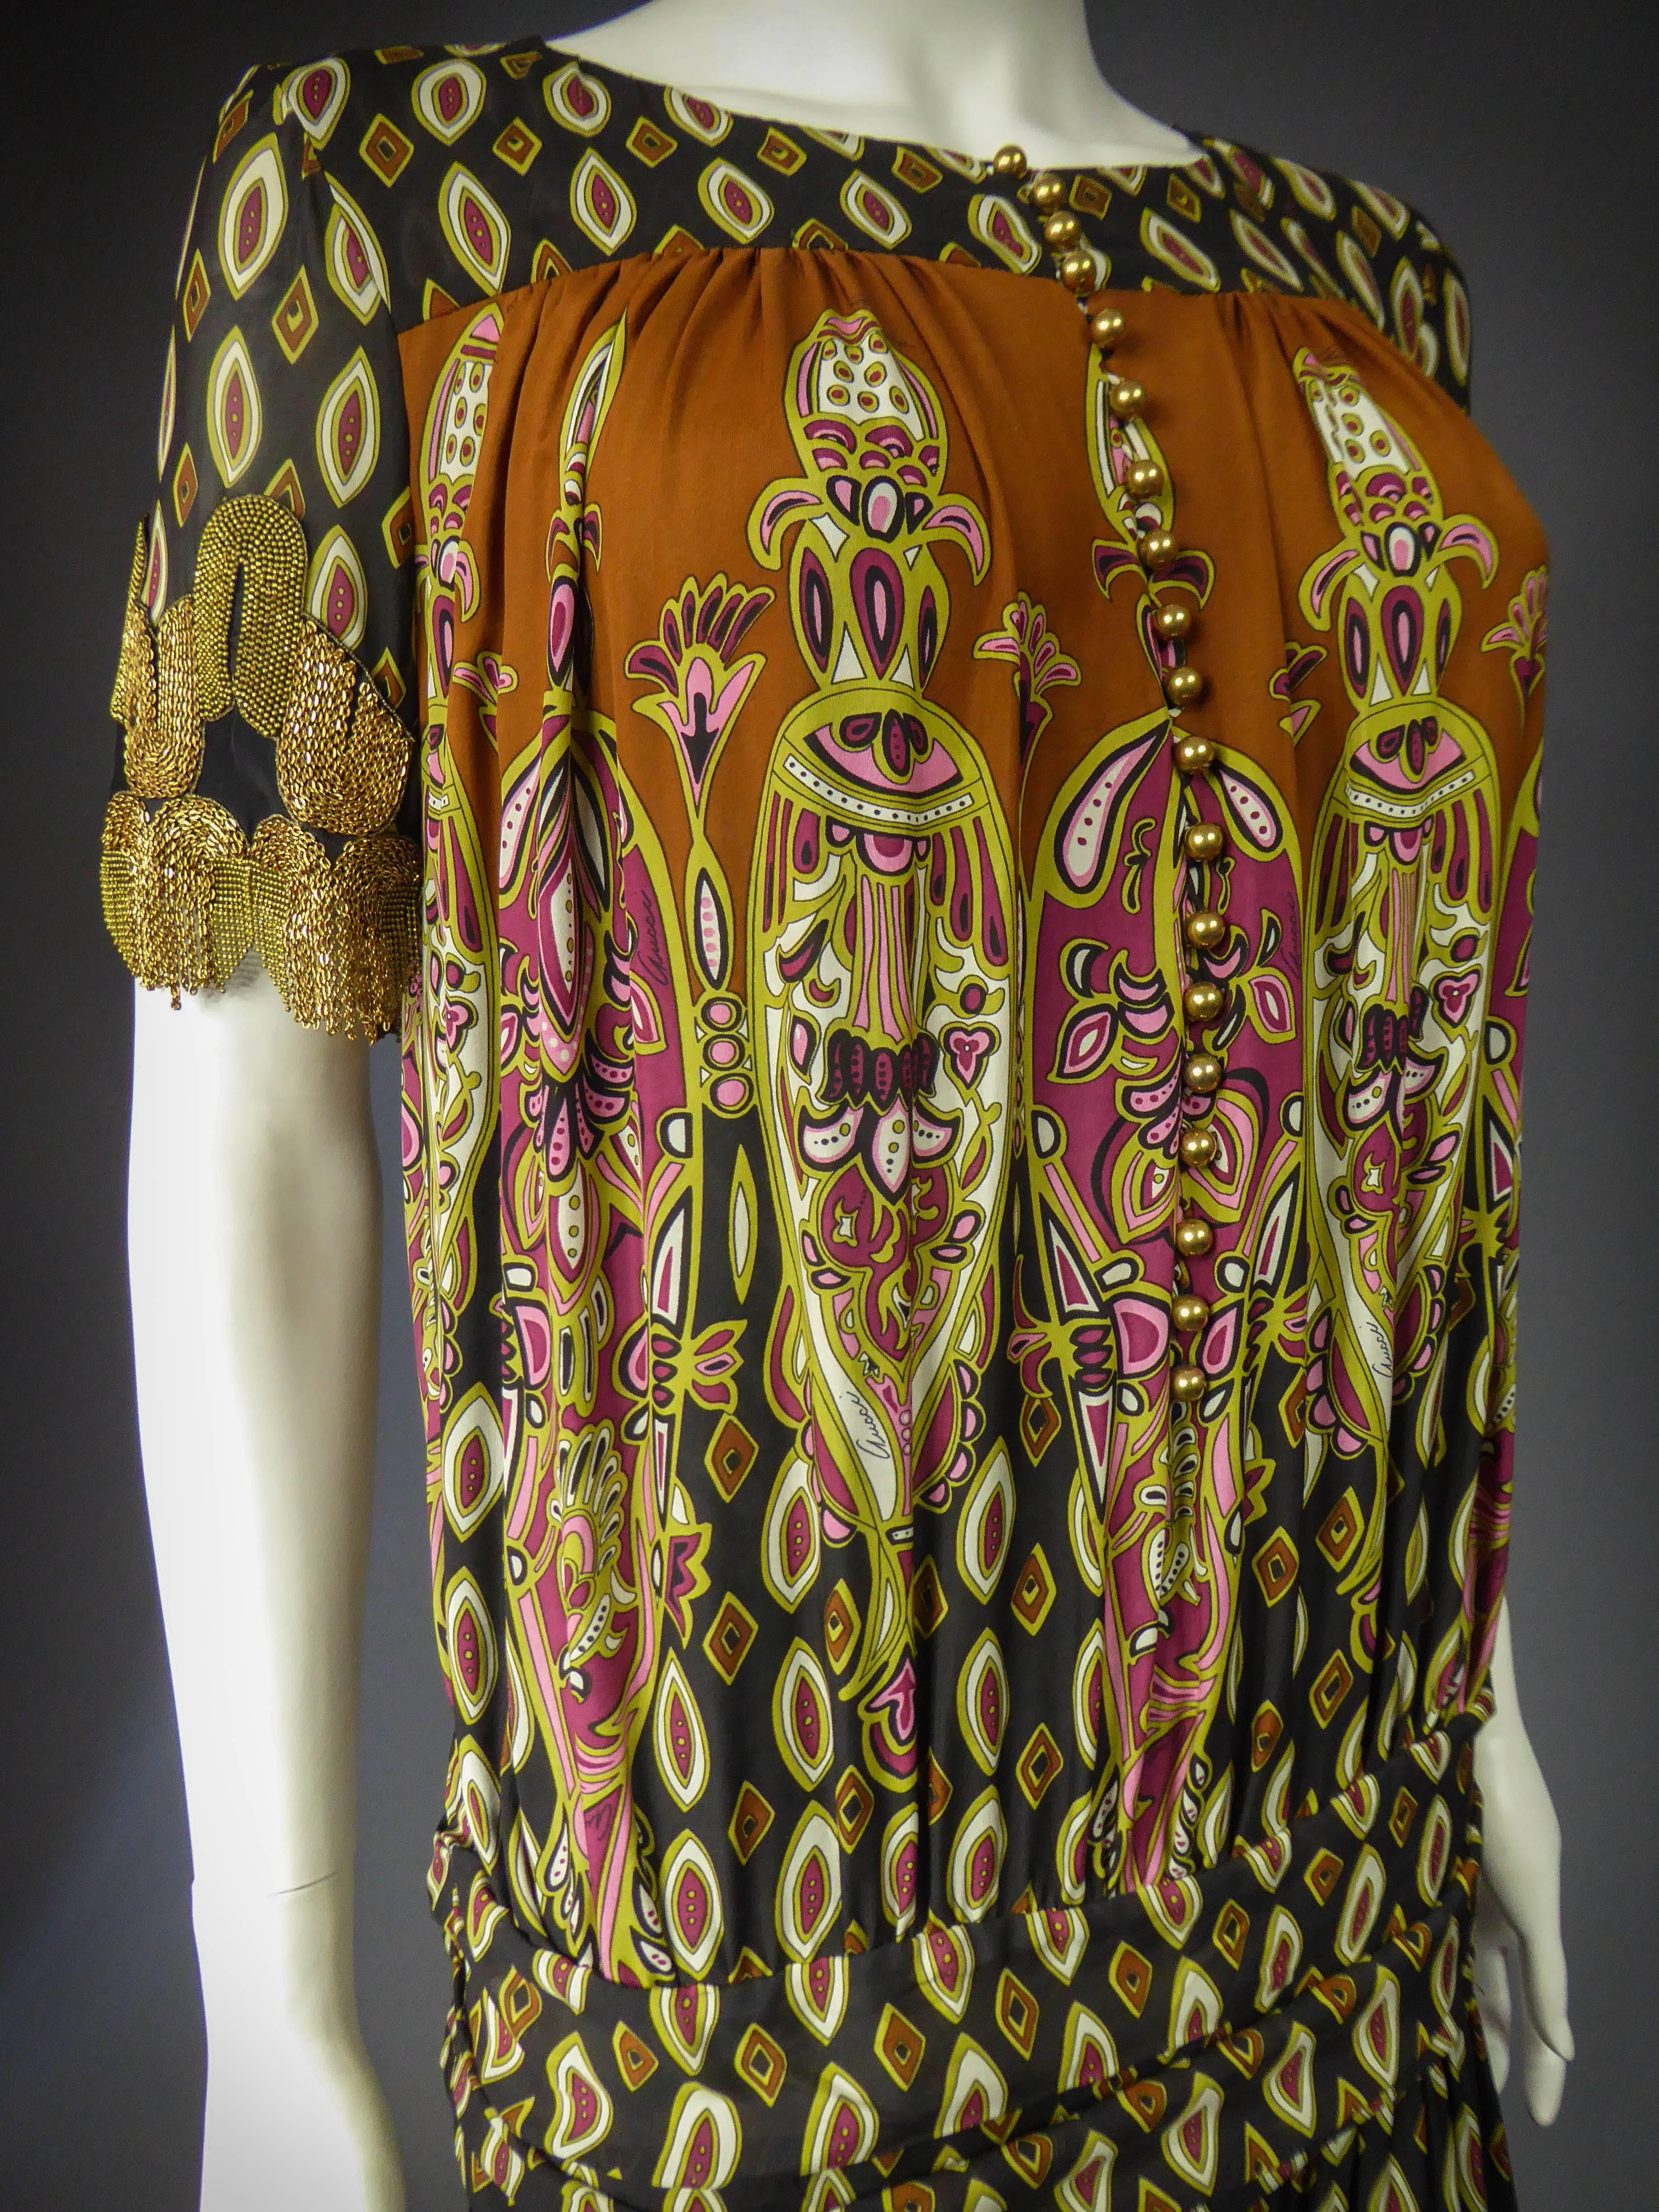 A Printed Silk Gucci Dress Fall / Winter 2008 - 2009 In Good Condition For Sale In Toulon, FR